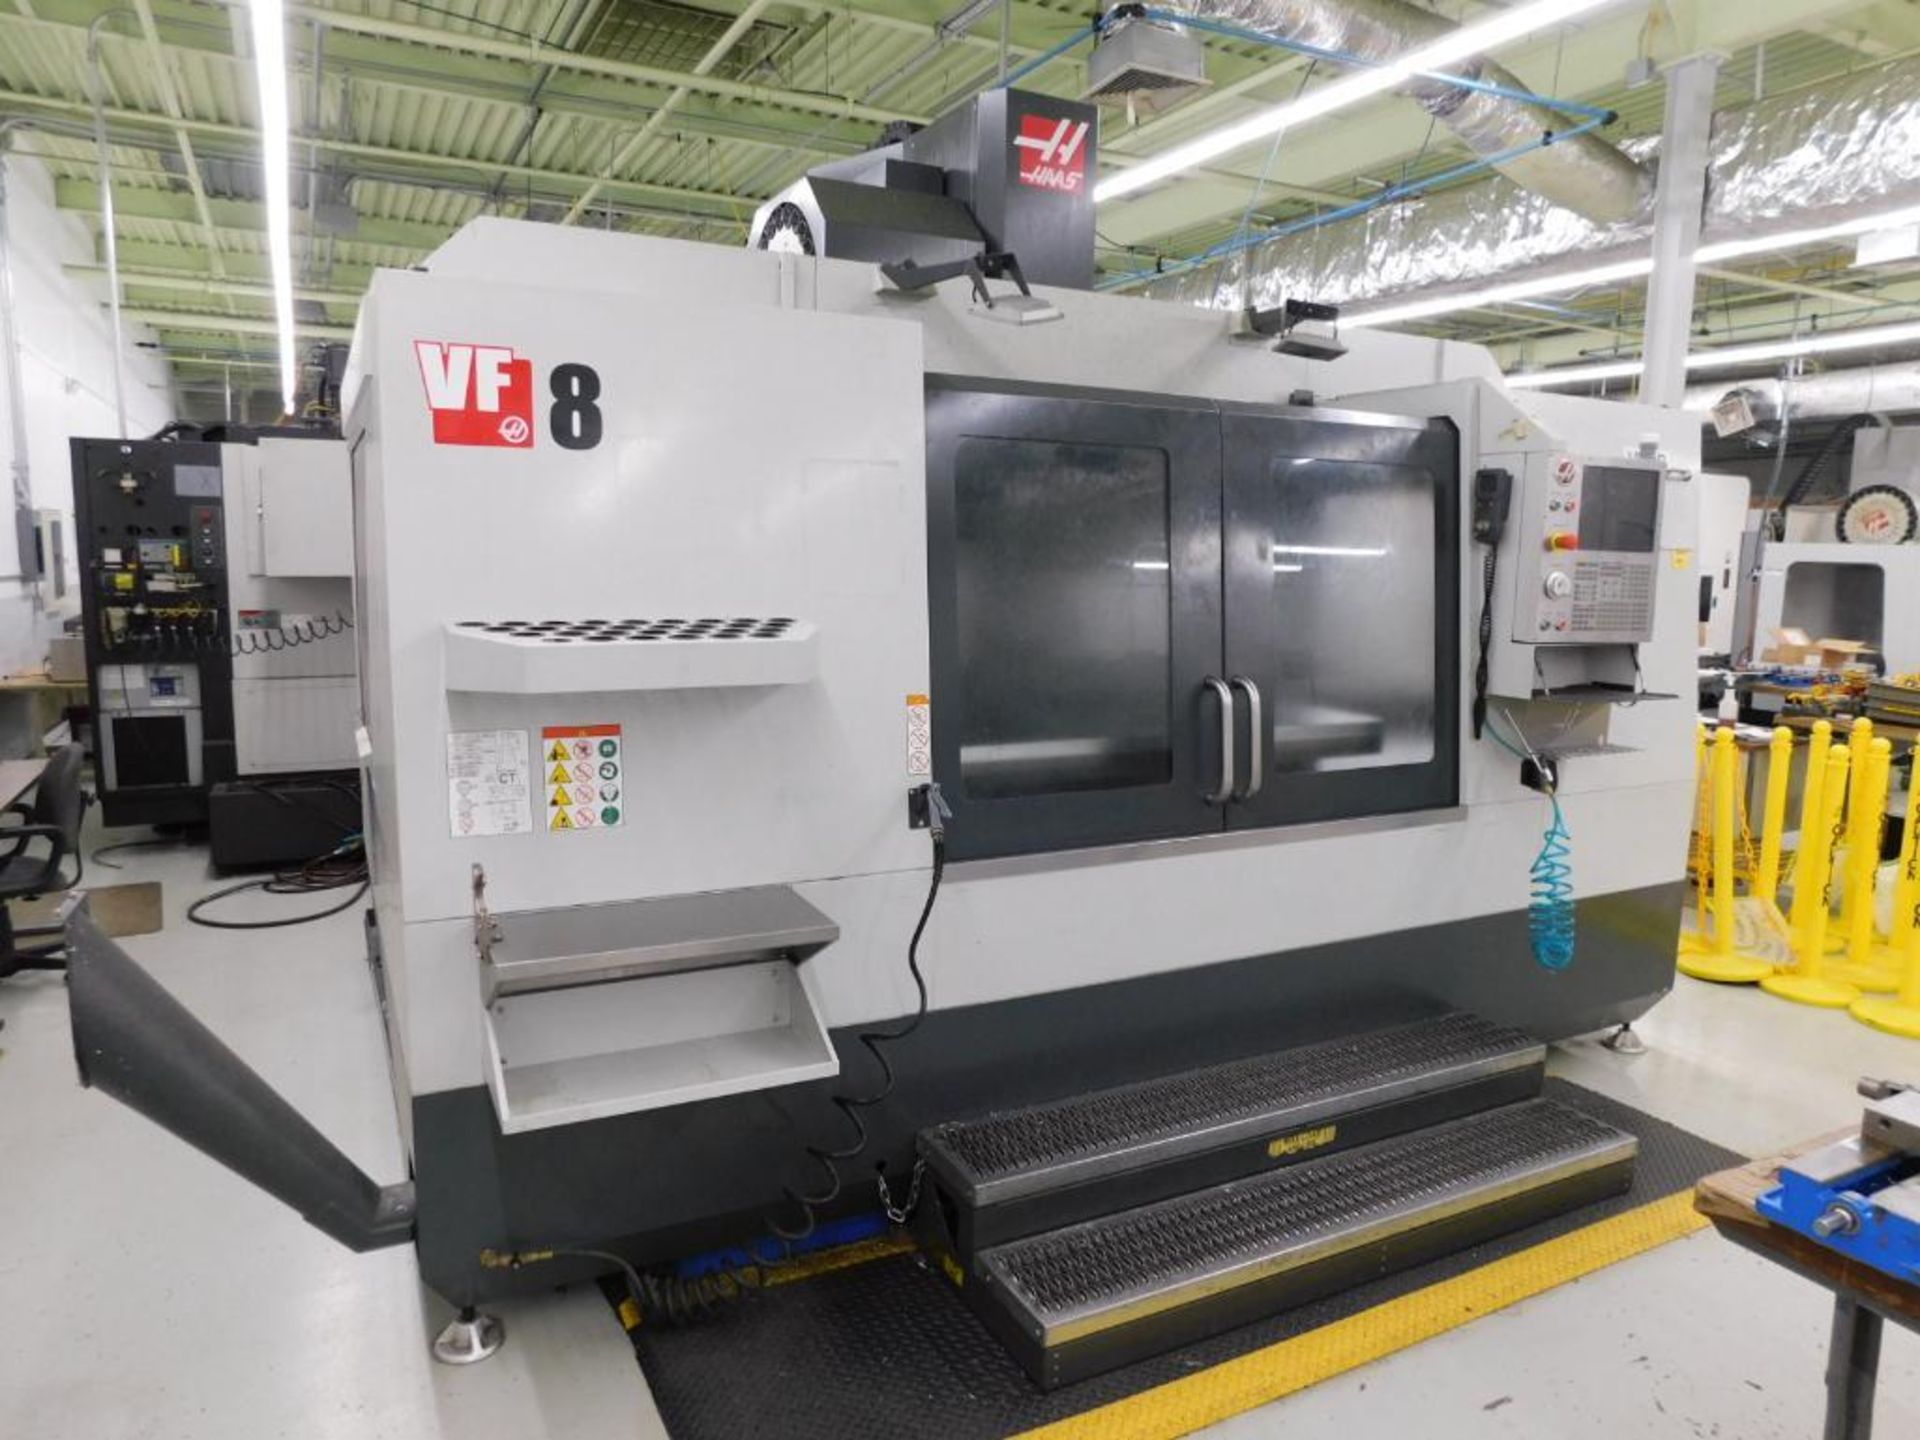 Haas VF-8/40 CNC Vertical Machining Center, Haas CNC Control w/Remote Pendant, Travels: X-64", Y-40" - Image 2 of 13